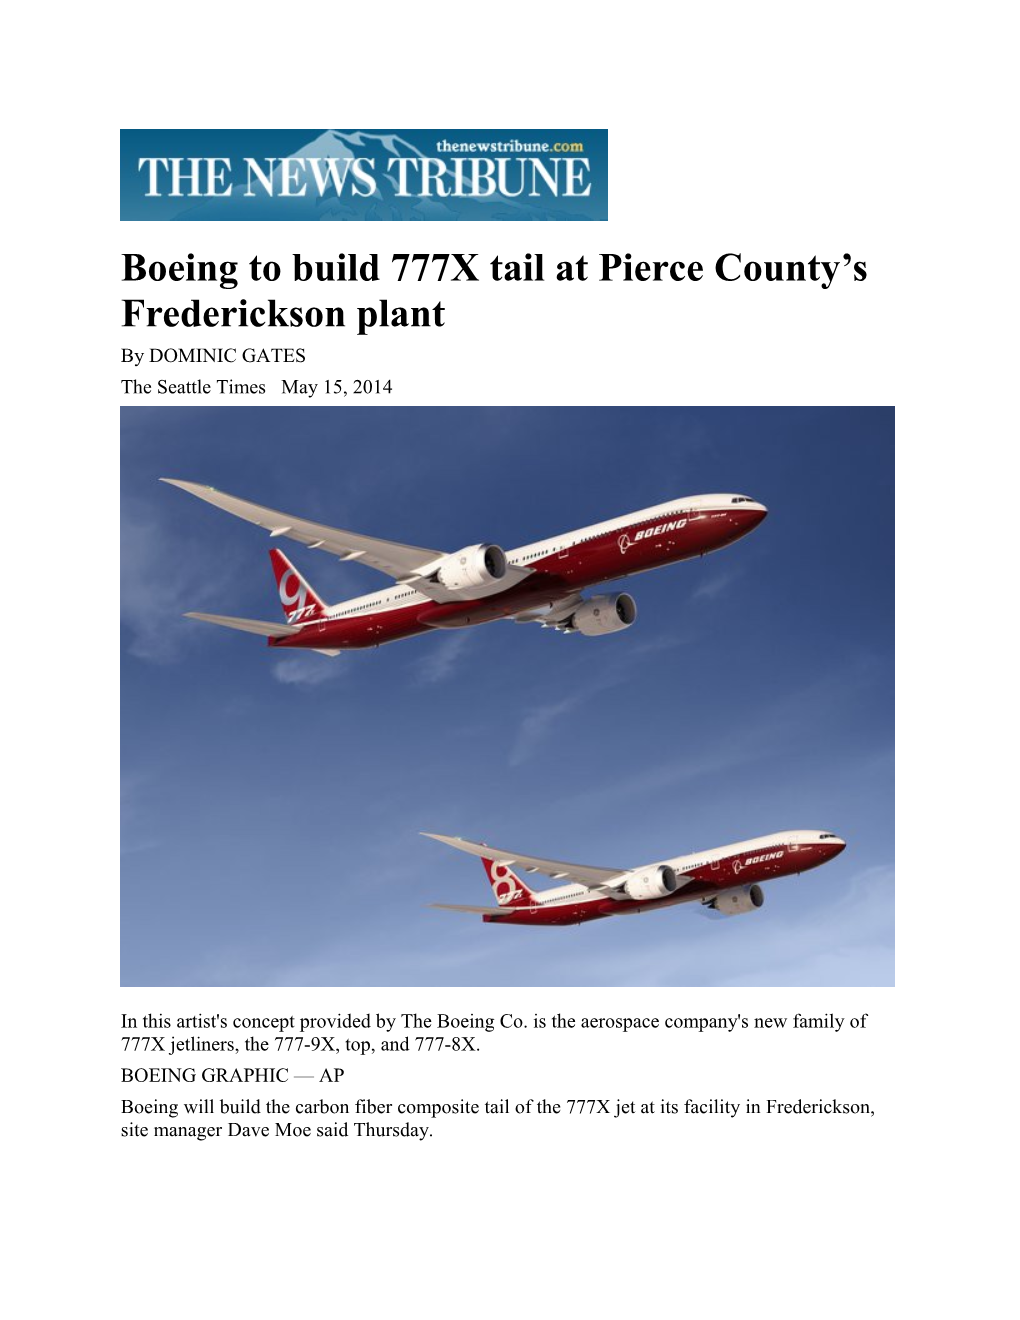 Boeing to Build 777X Tail at Pierce County S Frederickson Plant